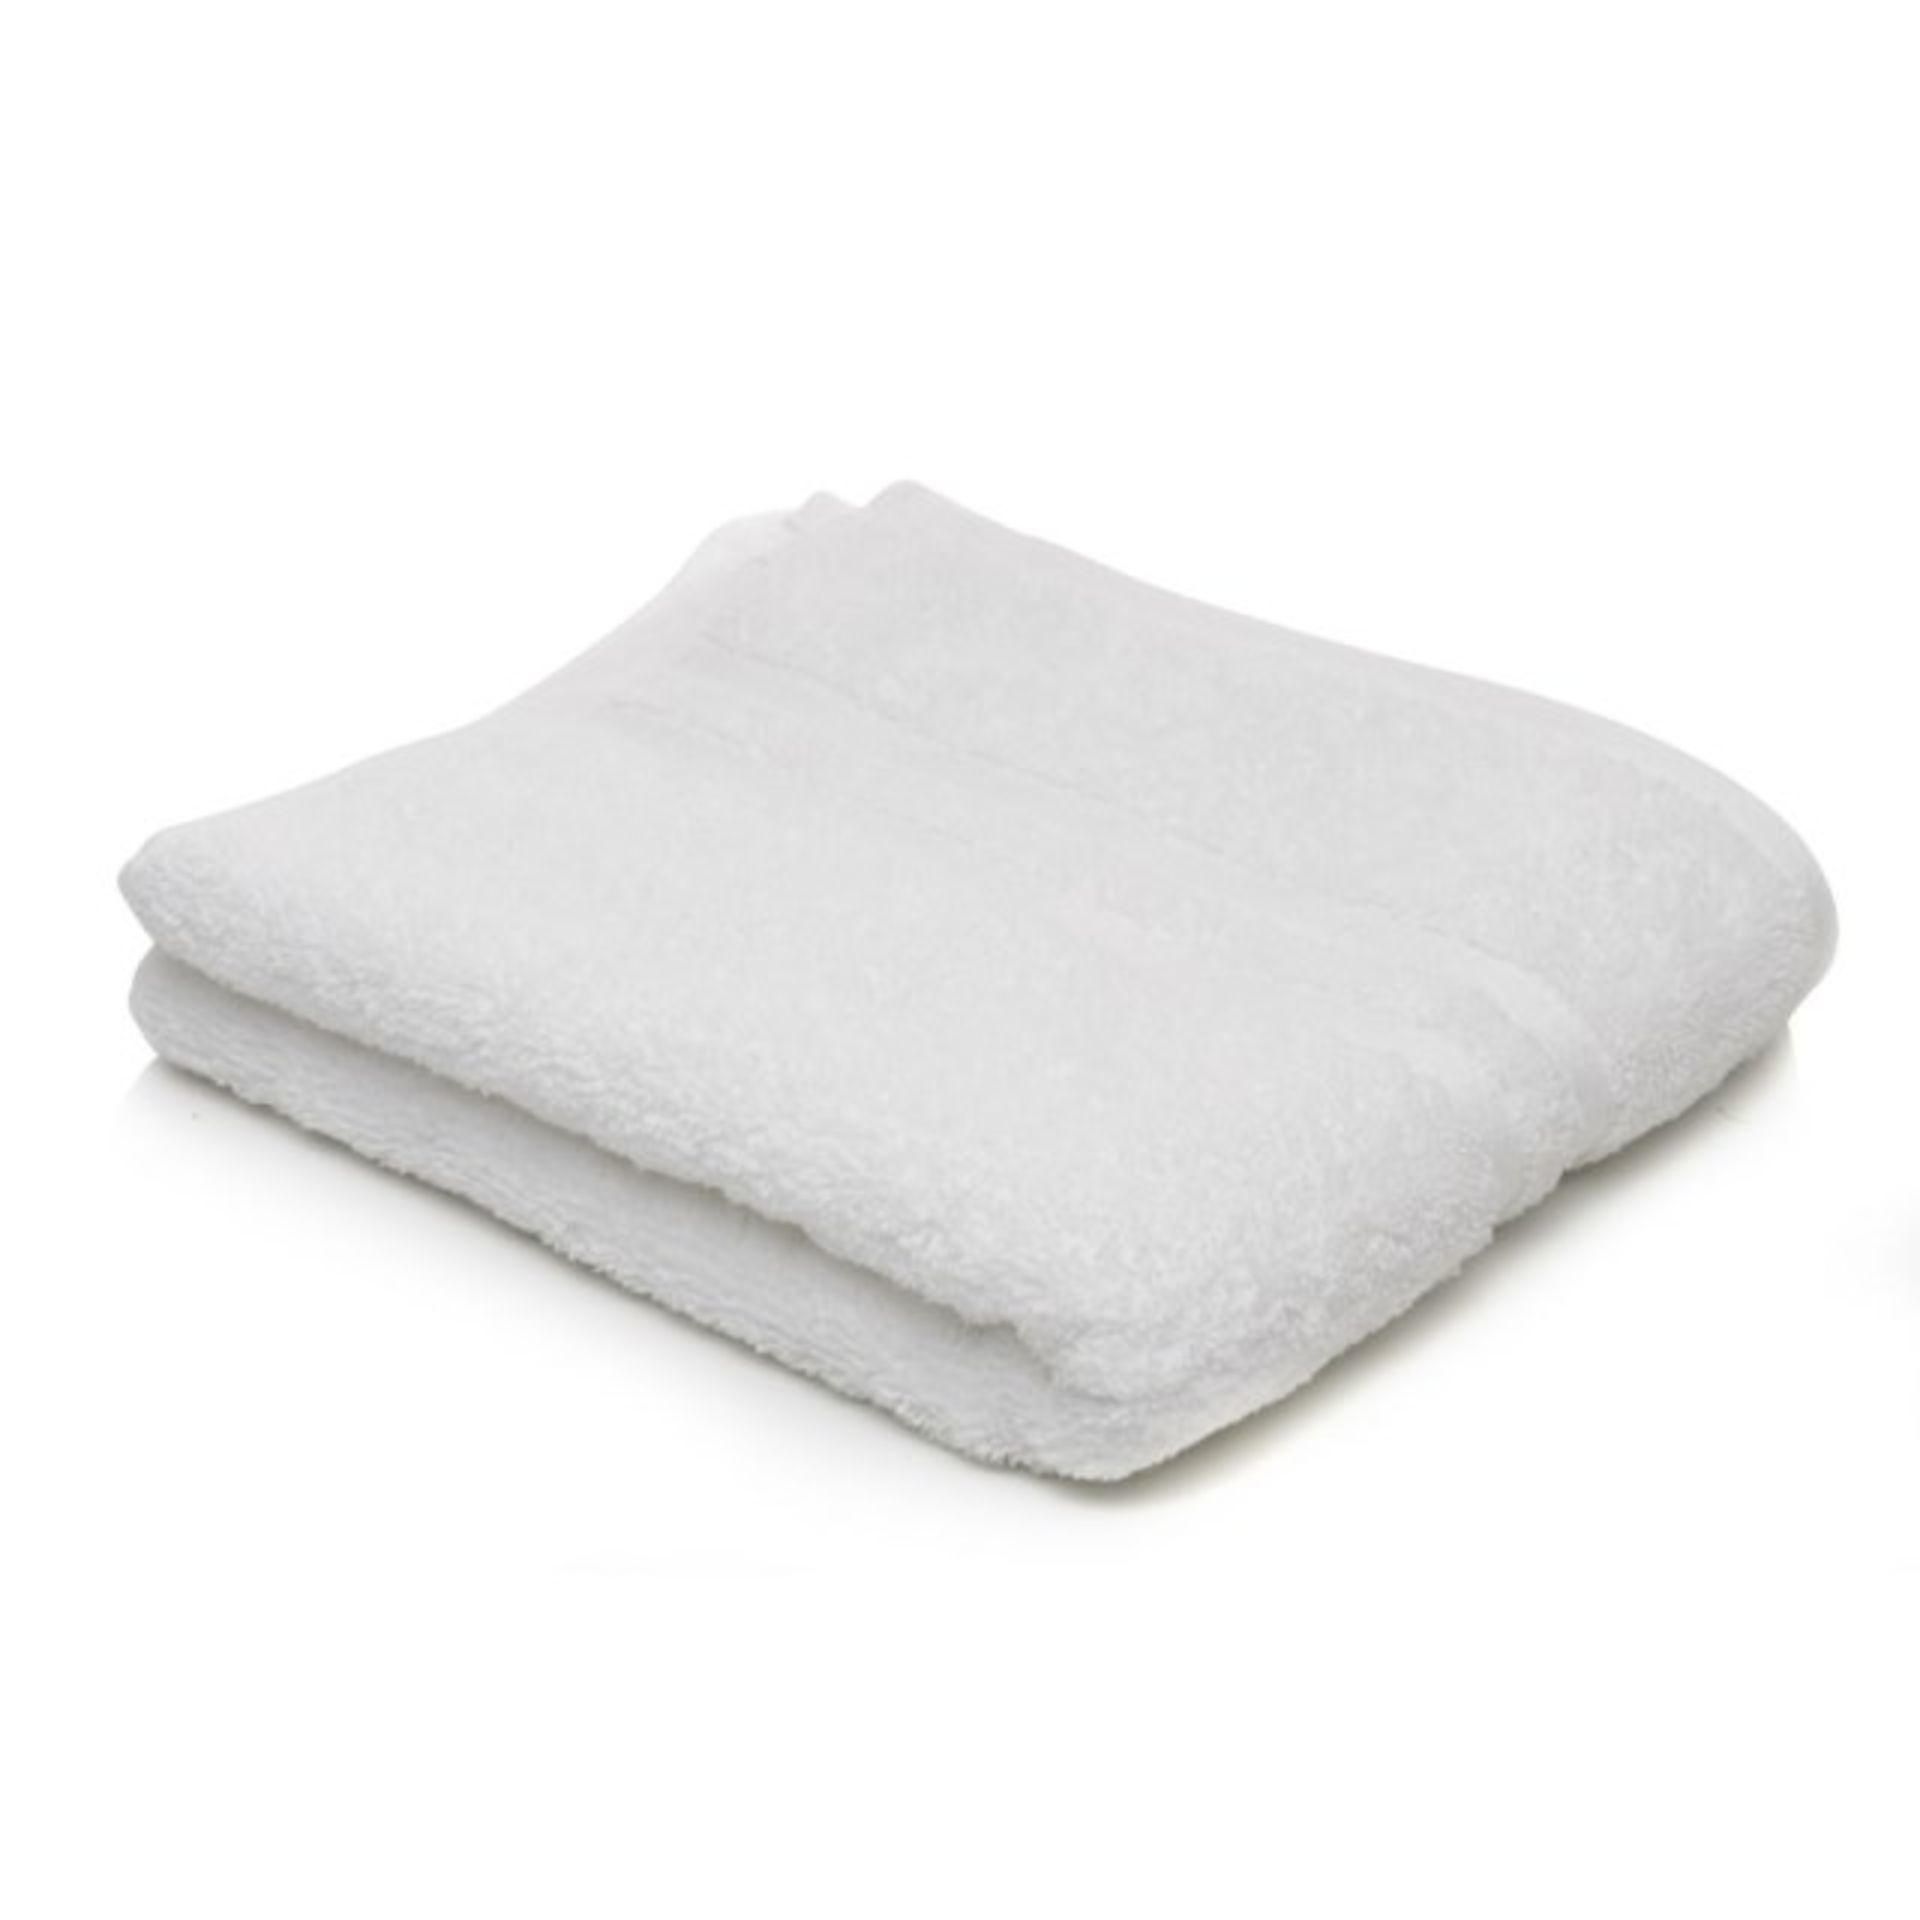 V *TRADE QTY* Brand New Hotel Quality Large Cotton Bath Sheet X 6 YOUR BID PRICE TO BE MULTIPLIED BY